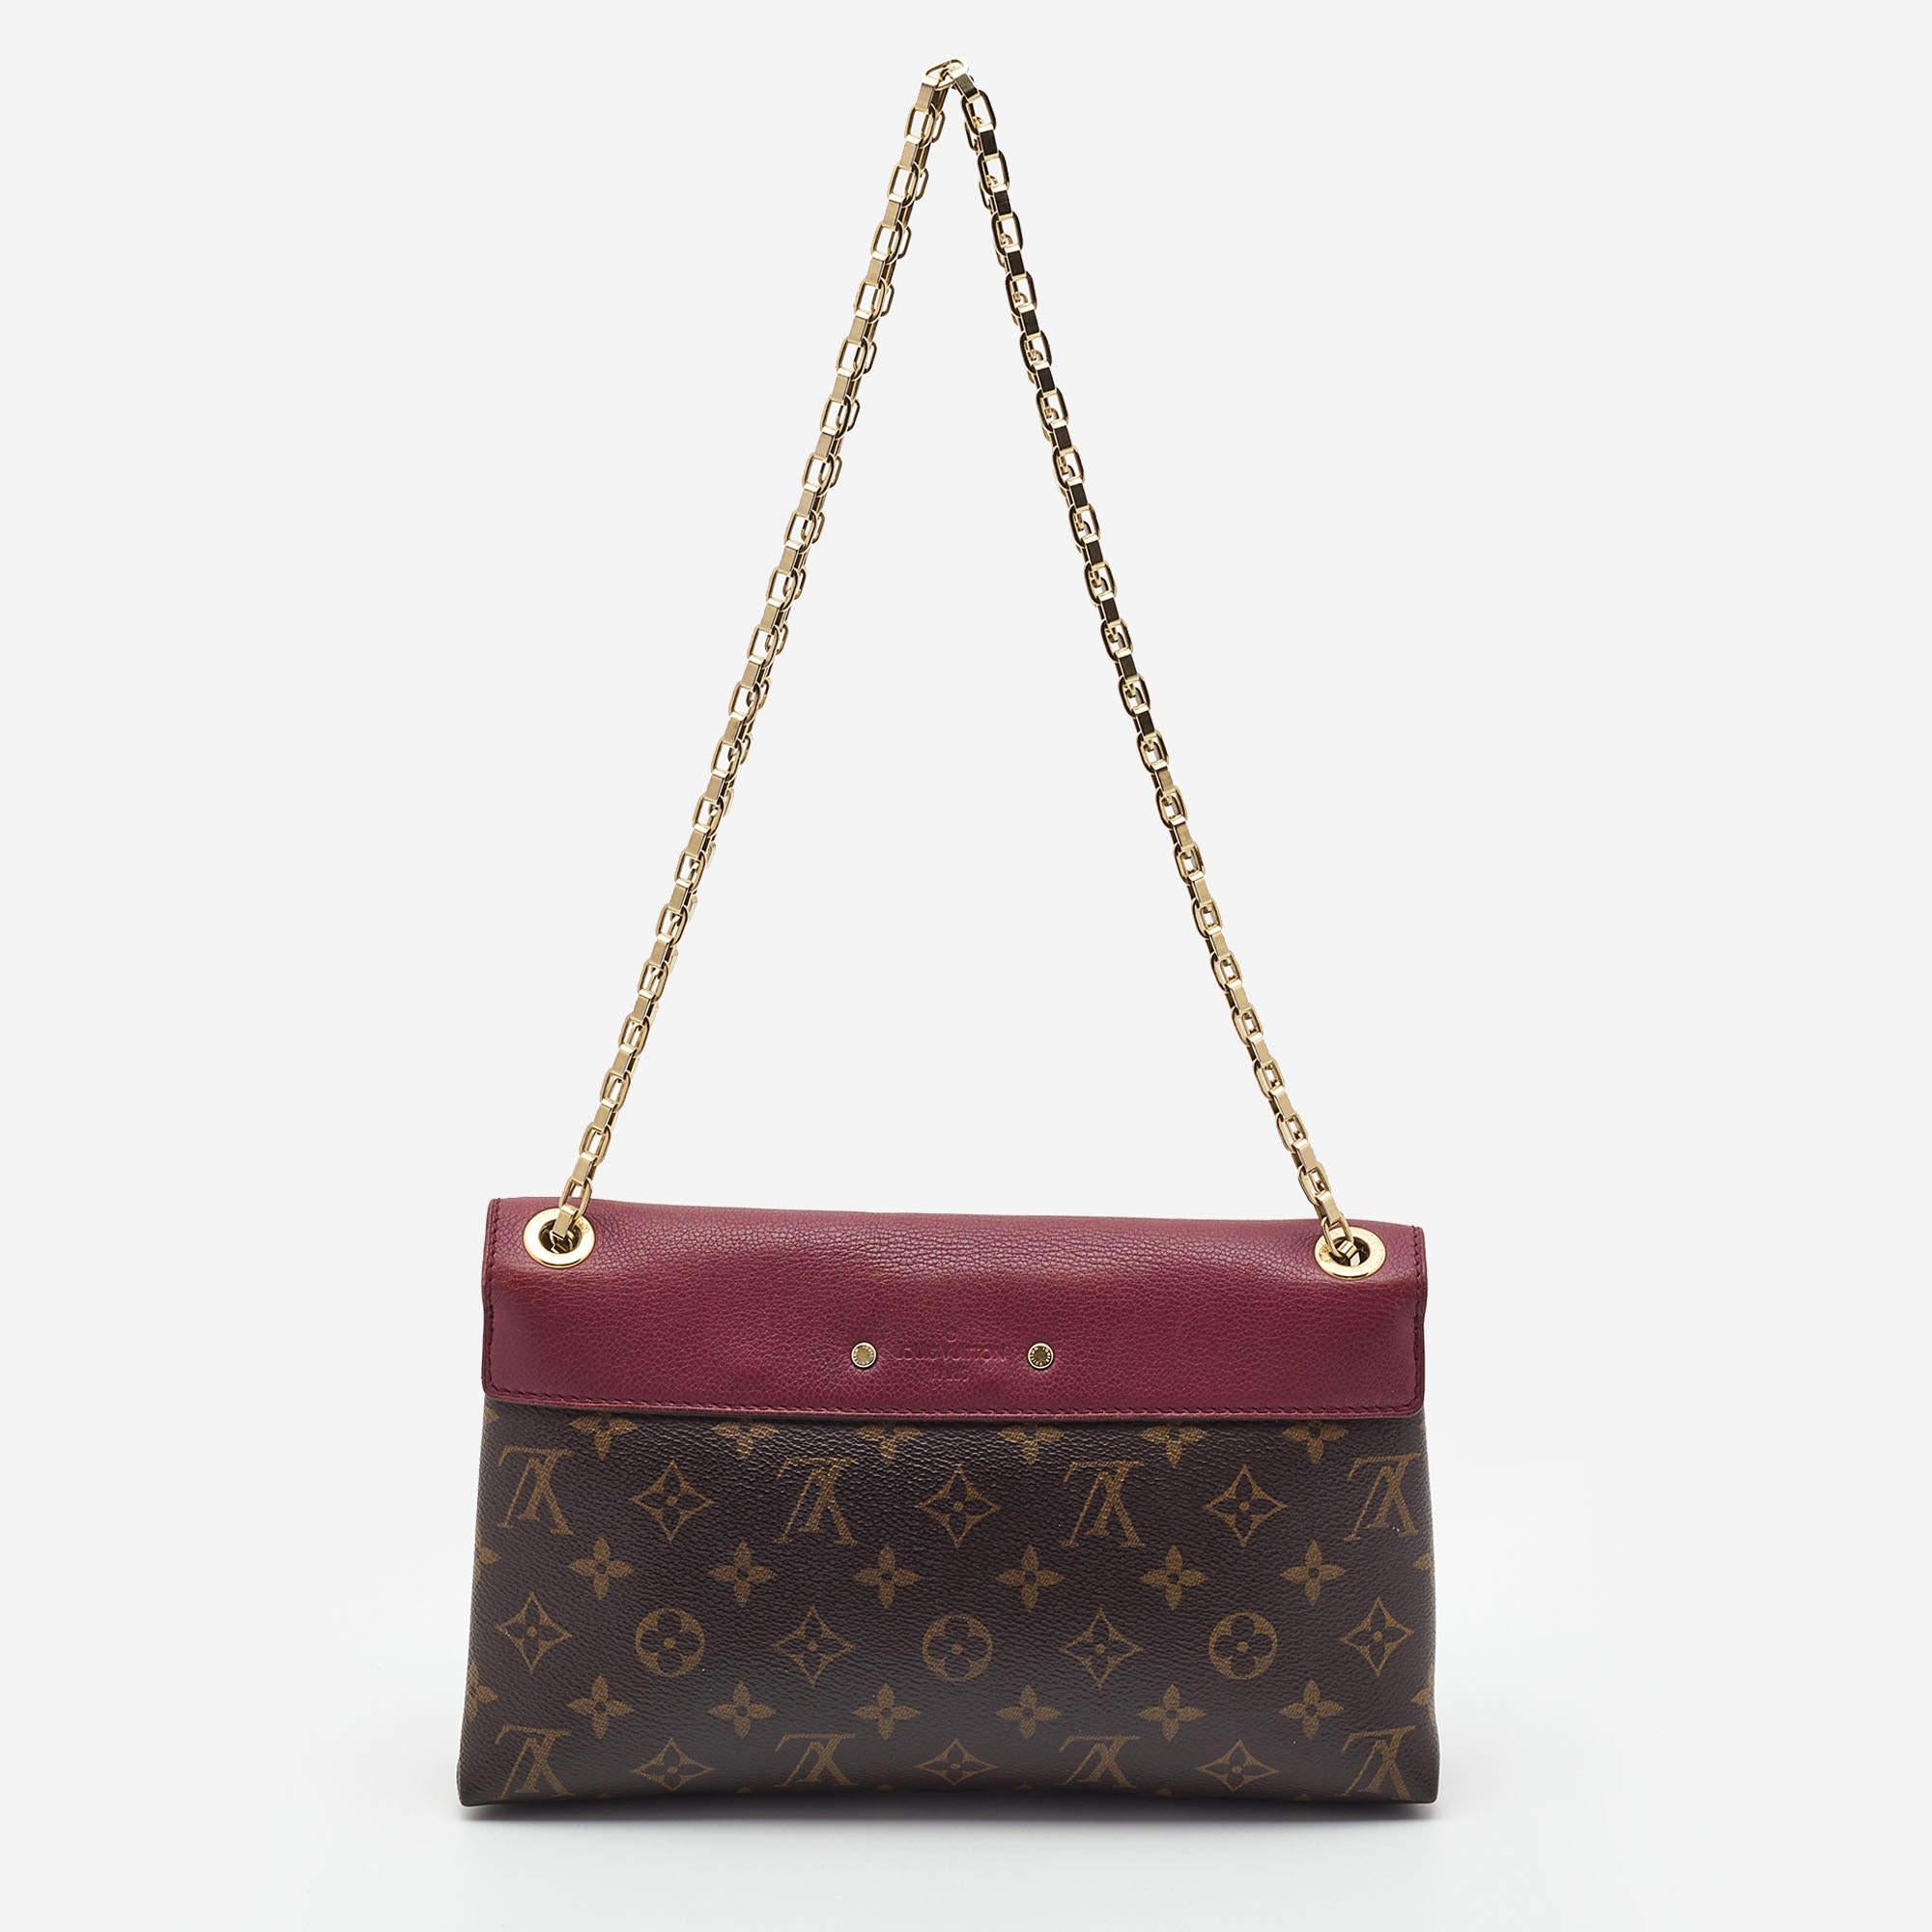 Indulge in luxury with this LV Pallas bag. Meticulously crafted from premium materials, it combines exquisite design, impeccable craftsmanship, and timeless elegance. Elevate your style with this fashion accessory.

